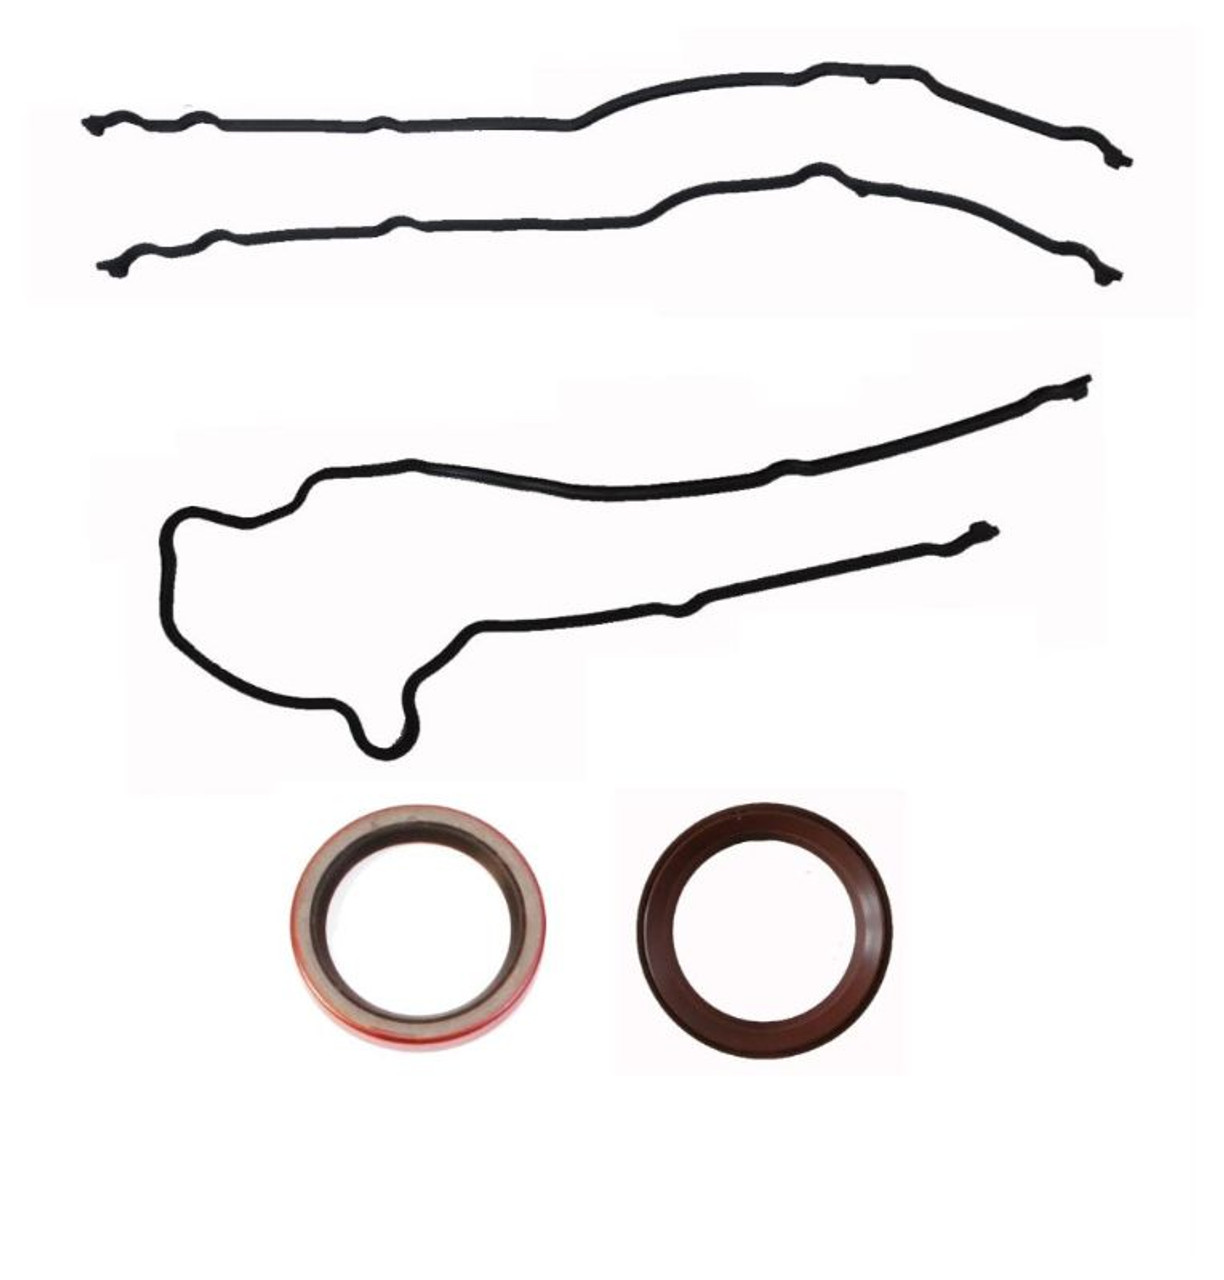 1997 Ford F-150 5.4L Engine Timing Cover Gasket Set TCF330-A -13